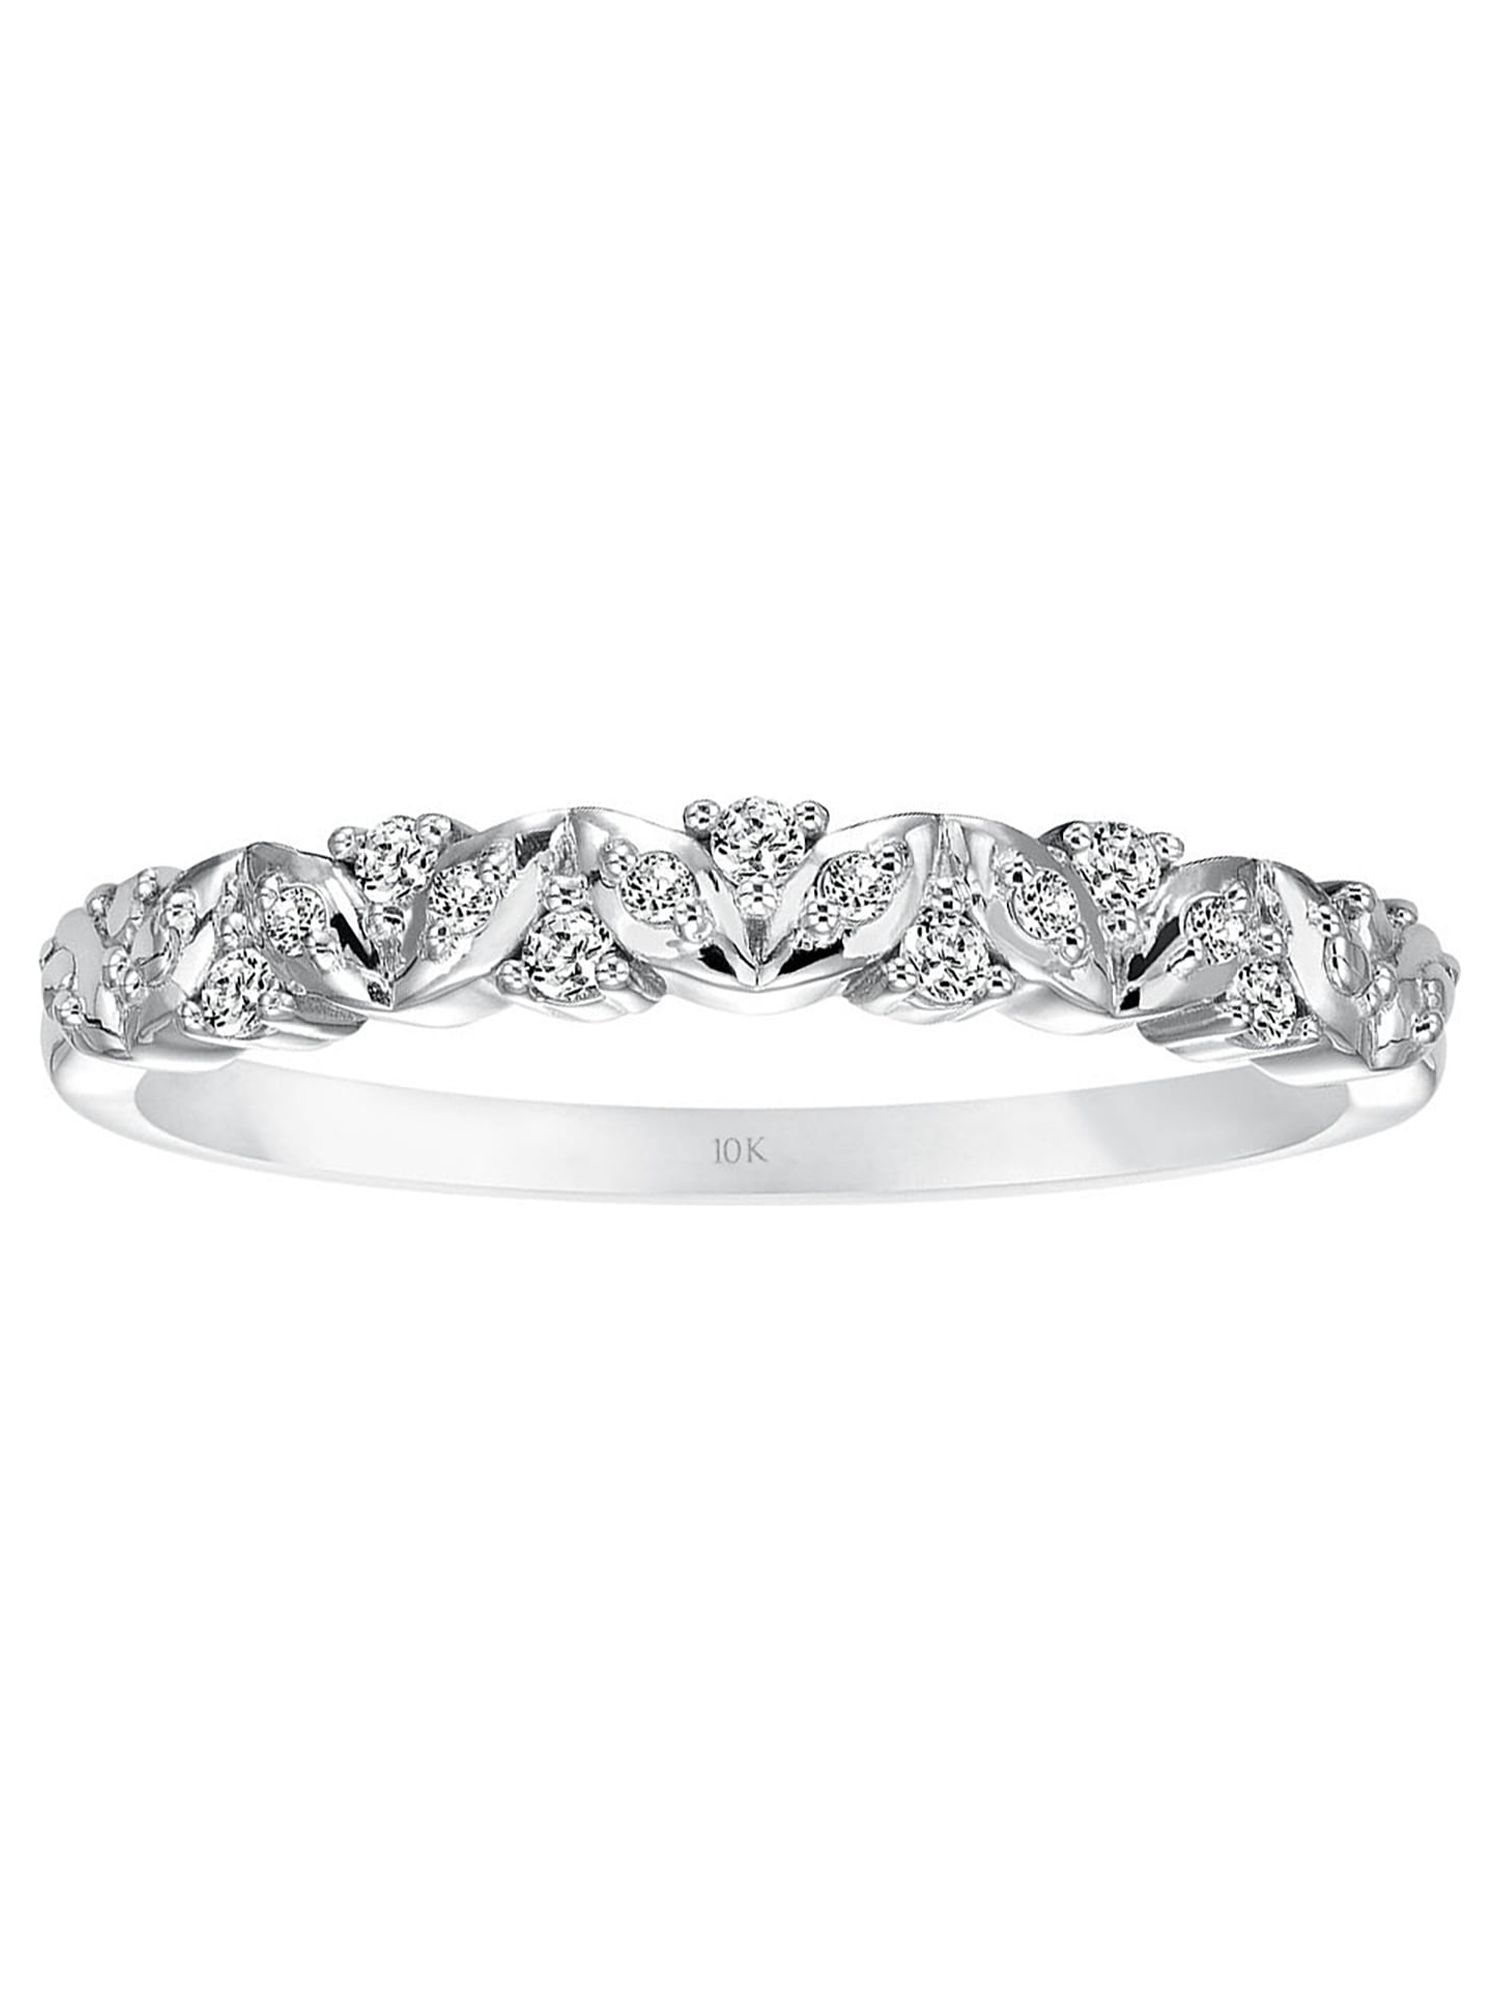 Sweet Remembrance 1/10 Carat T.W. Certified Diamond 10kt White Gold Women's Anniversary Band - image 2 of 7